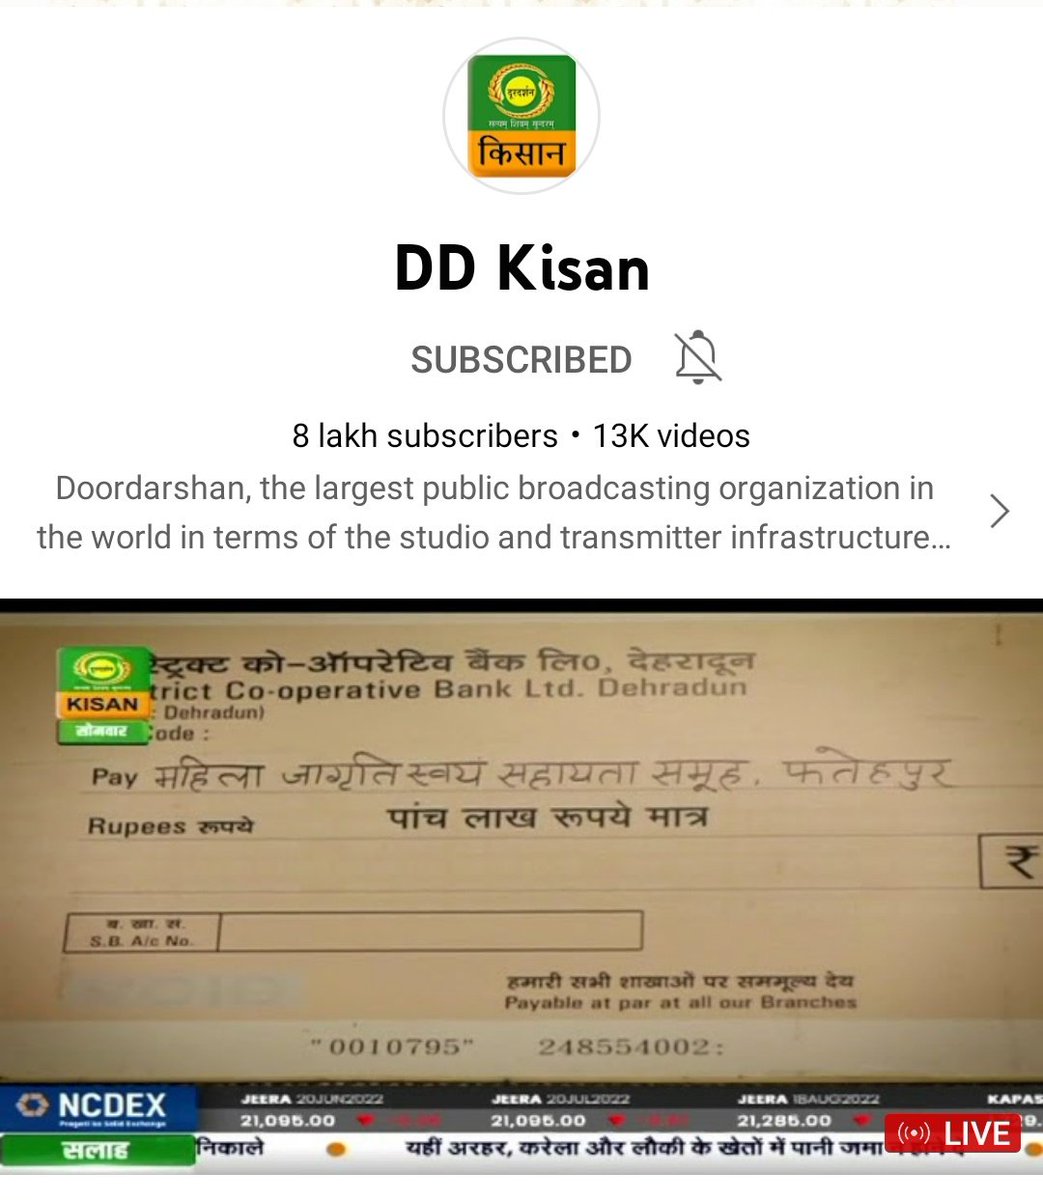 Congratulations @DDKisanChannel for 800K Subscribers on YouTube!